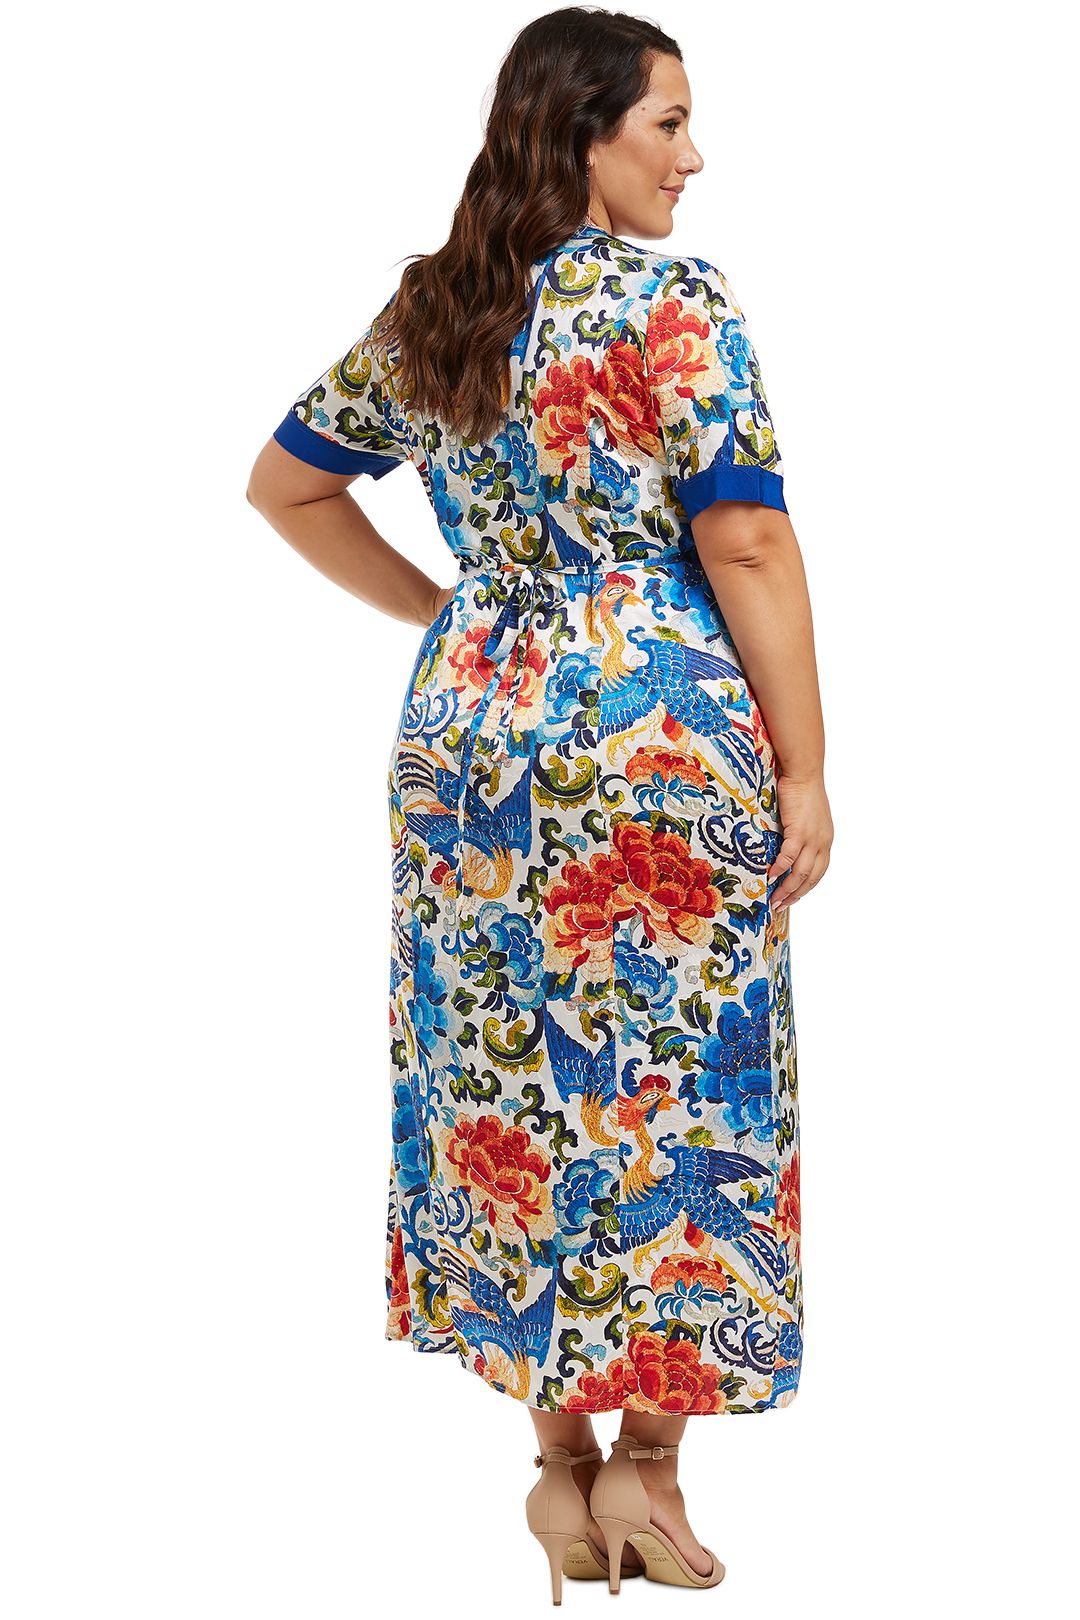 Cooper-by-Trelise-Cooper-Seas-The-Day-Blue-Print-Back